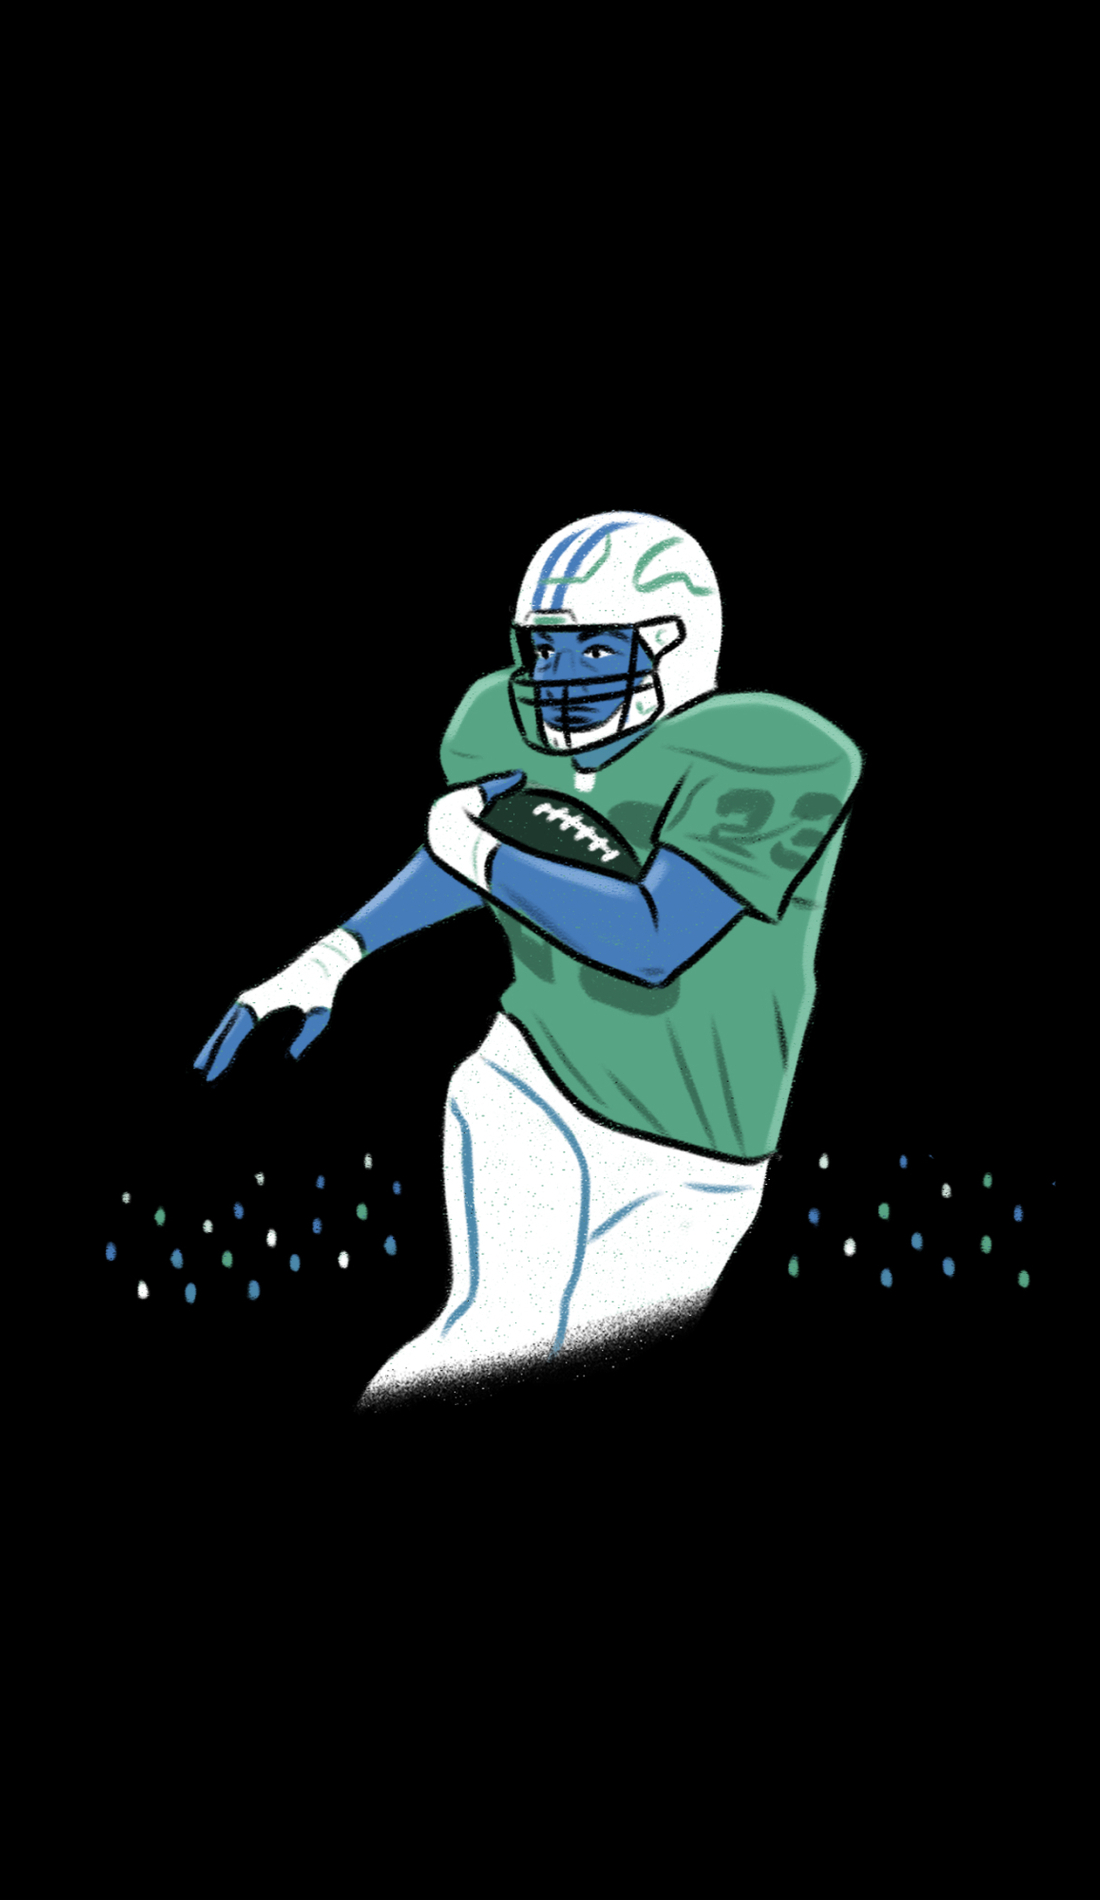 A Stetson Hatters Football live event